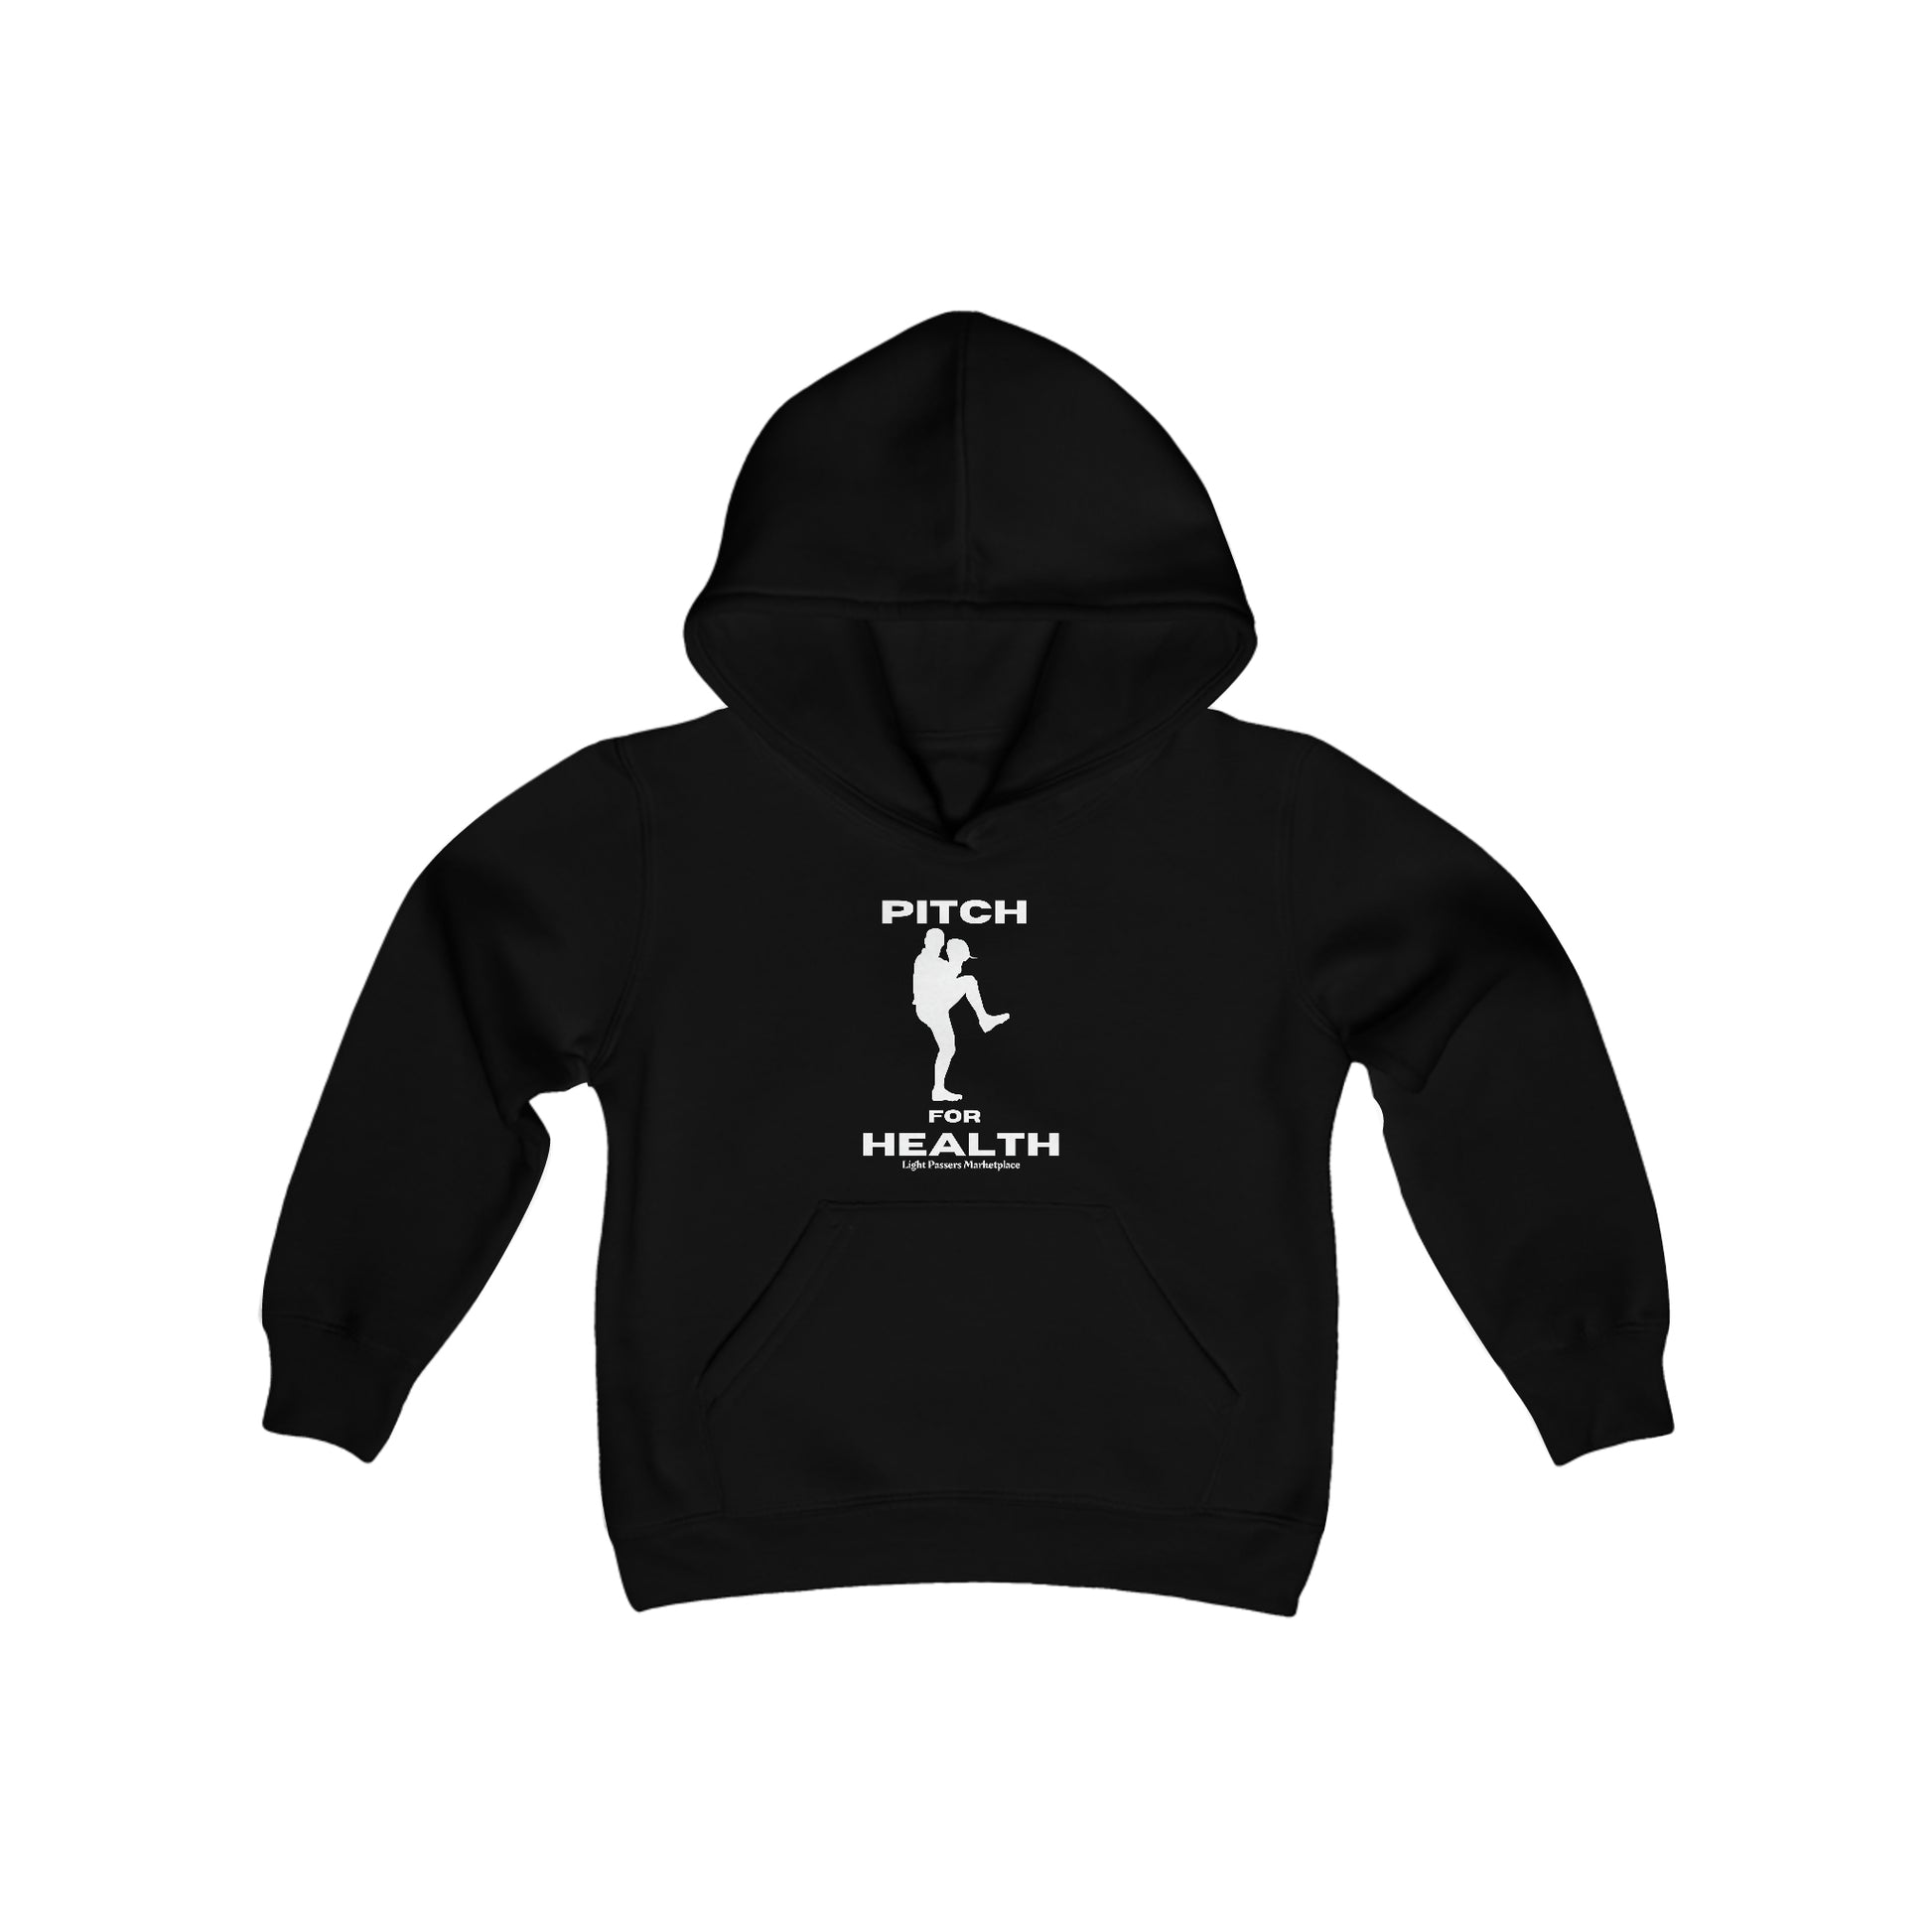 A black hoodie with a logo on the front, kangaroo pocket, and reinforced neck. Made of soft, preshrunk fleece (50% cotton, 50% polyester). Ideal for printing.